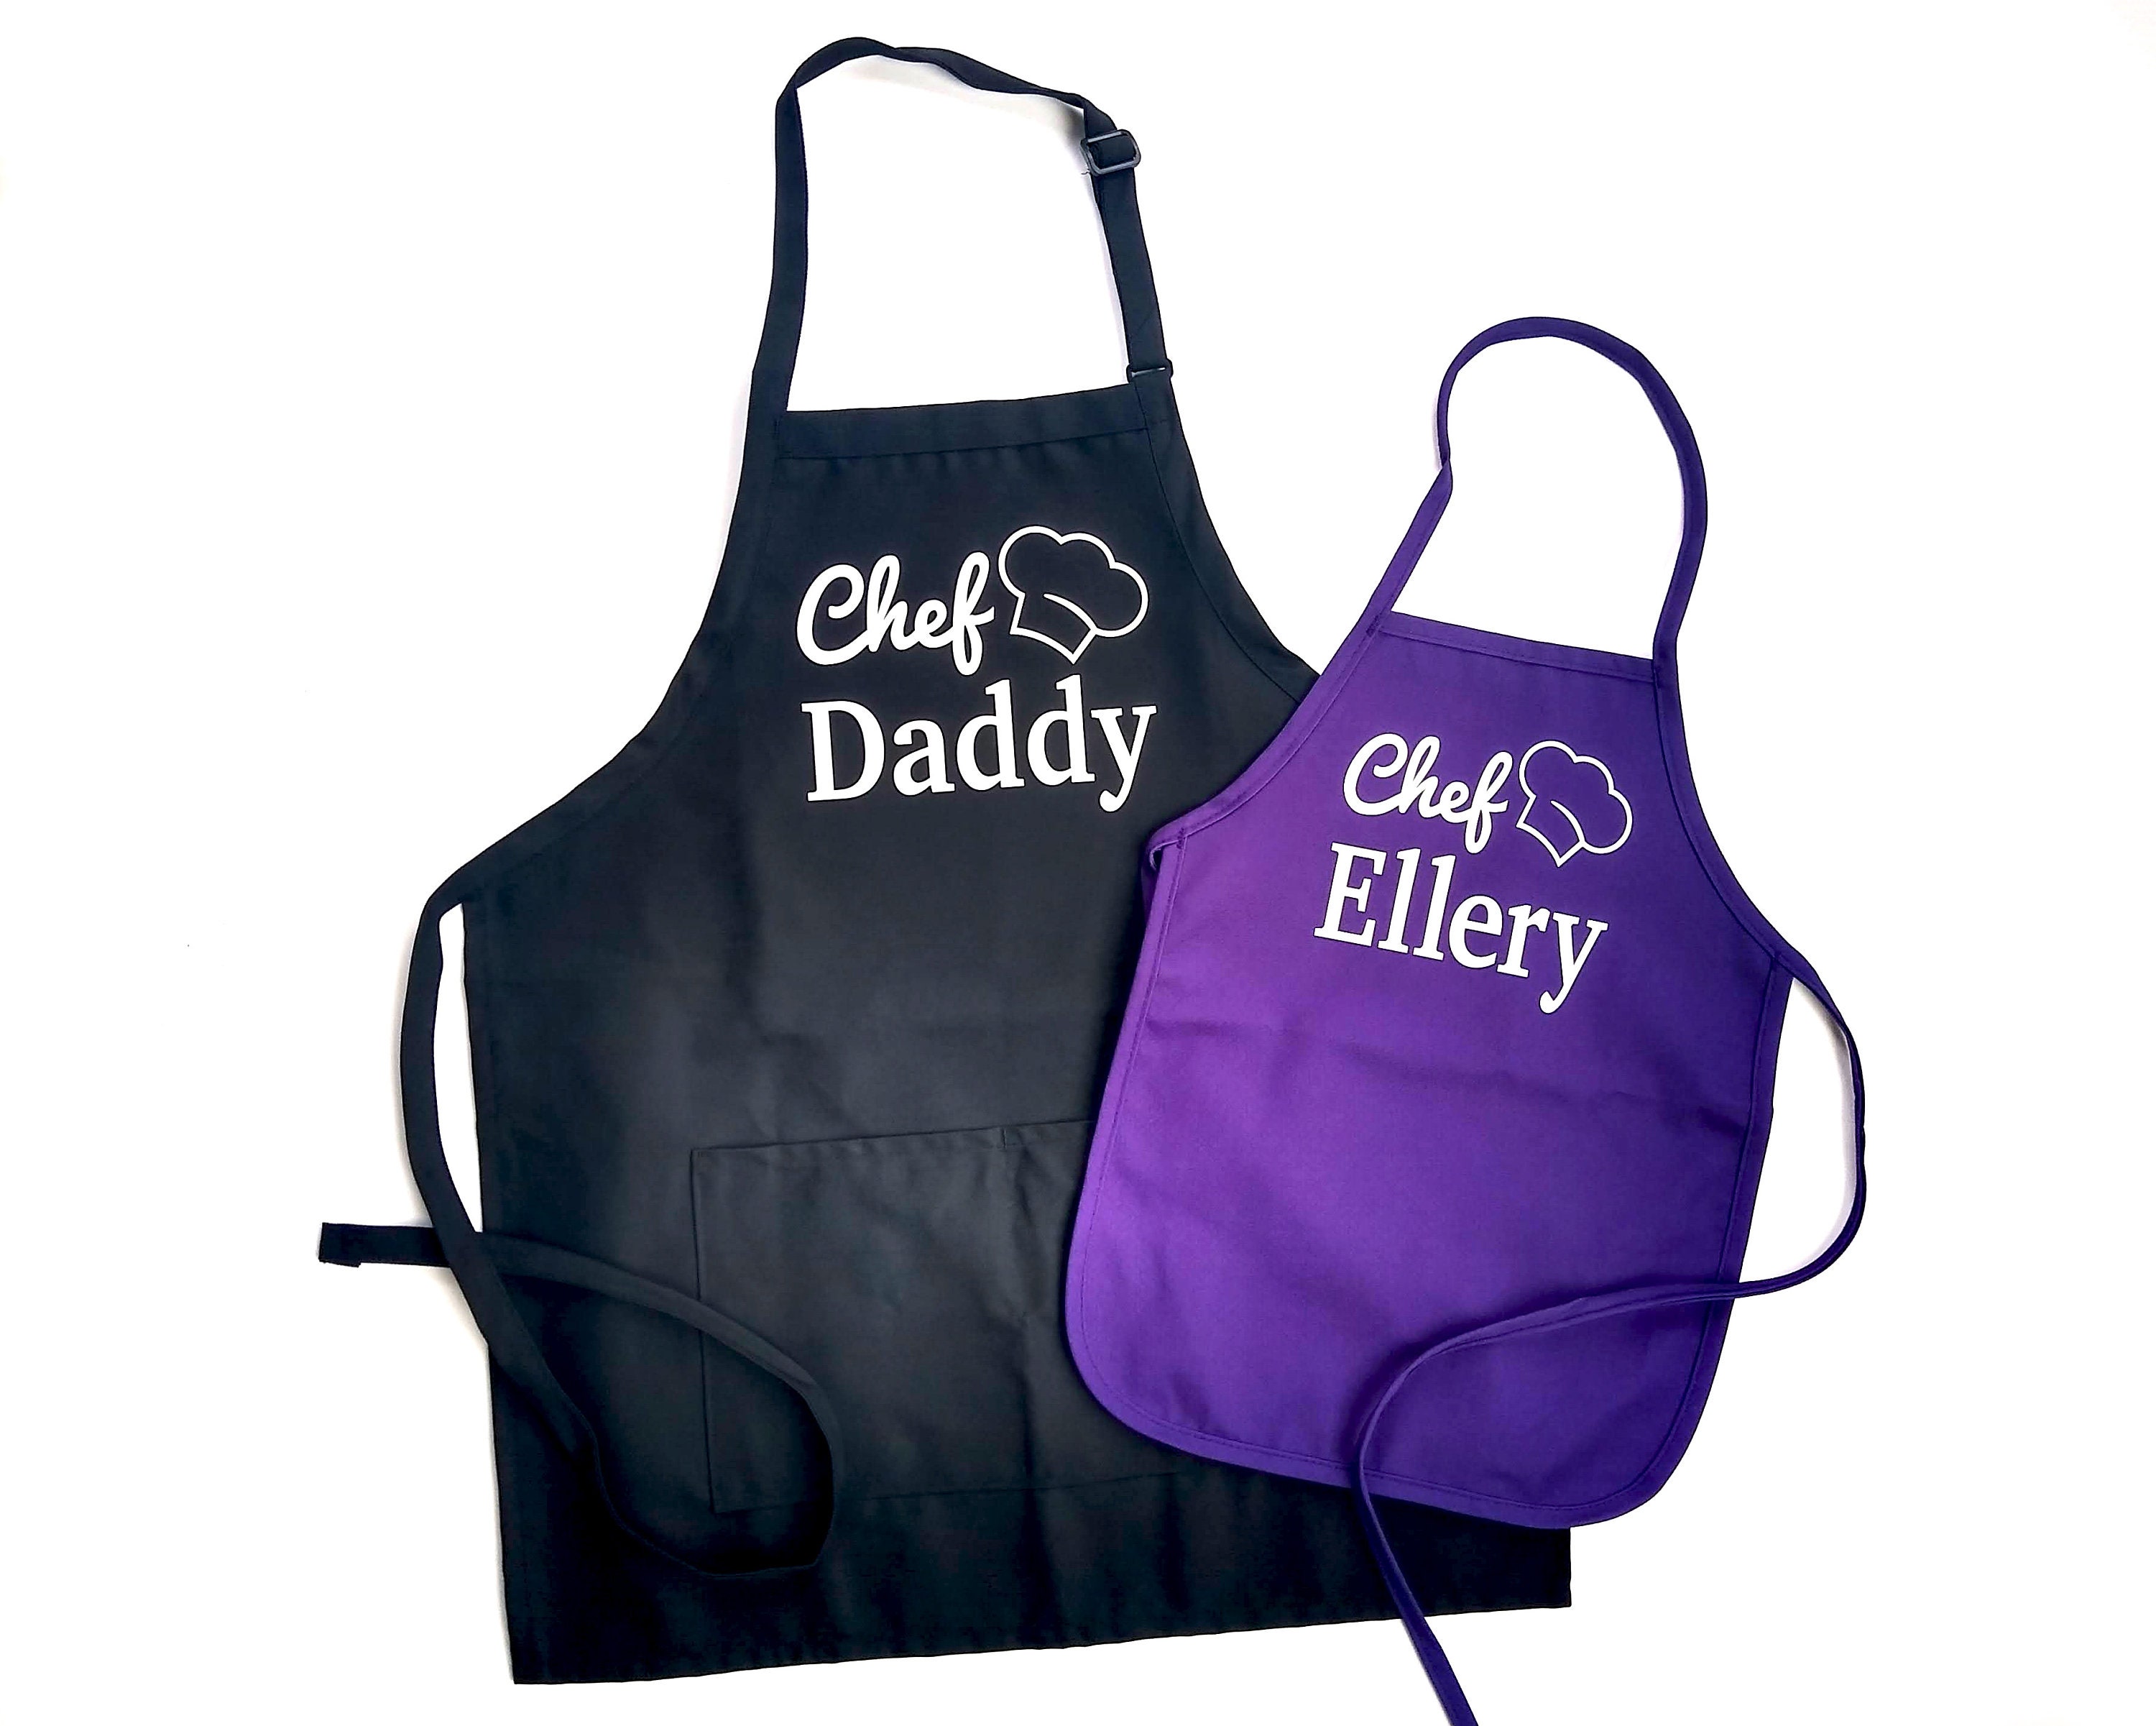 Retro Chef Personalized Aprons for Toddlers, Kids and Adults